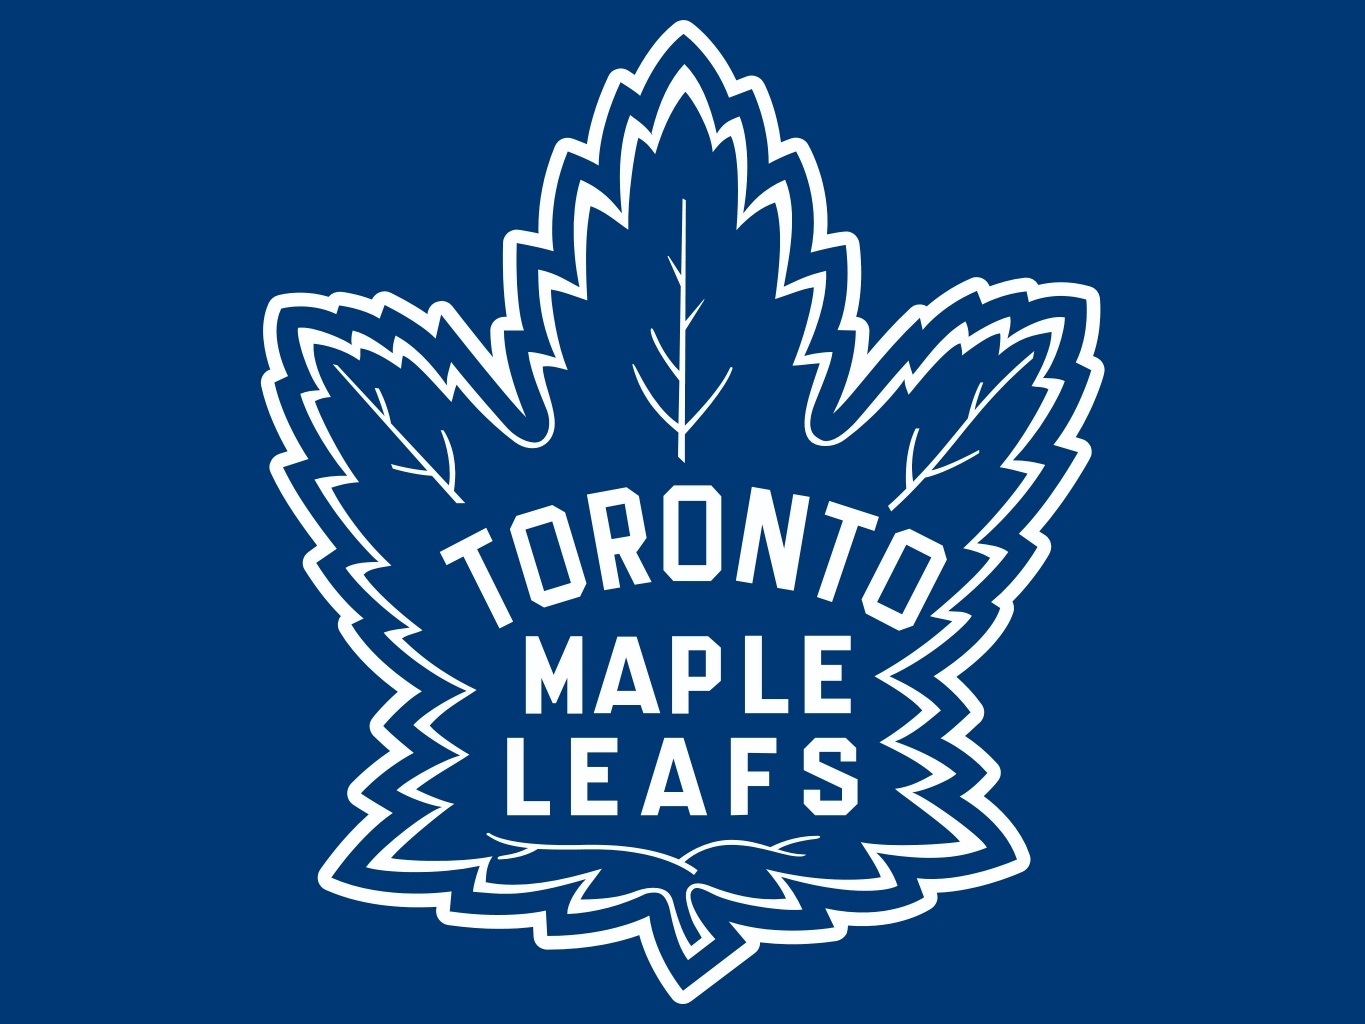 Awesome Toronto Maple Leafs Wallpaper